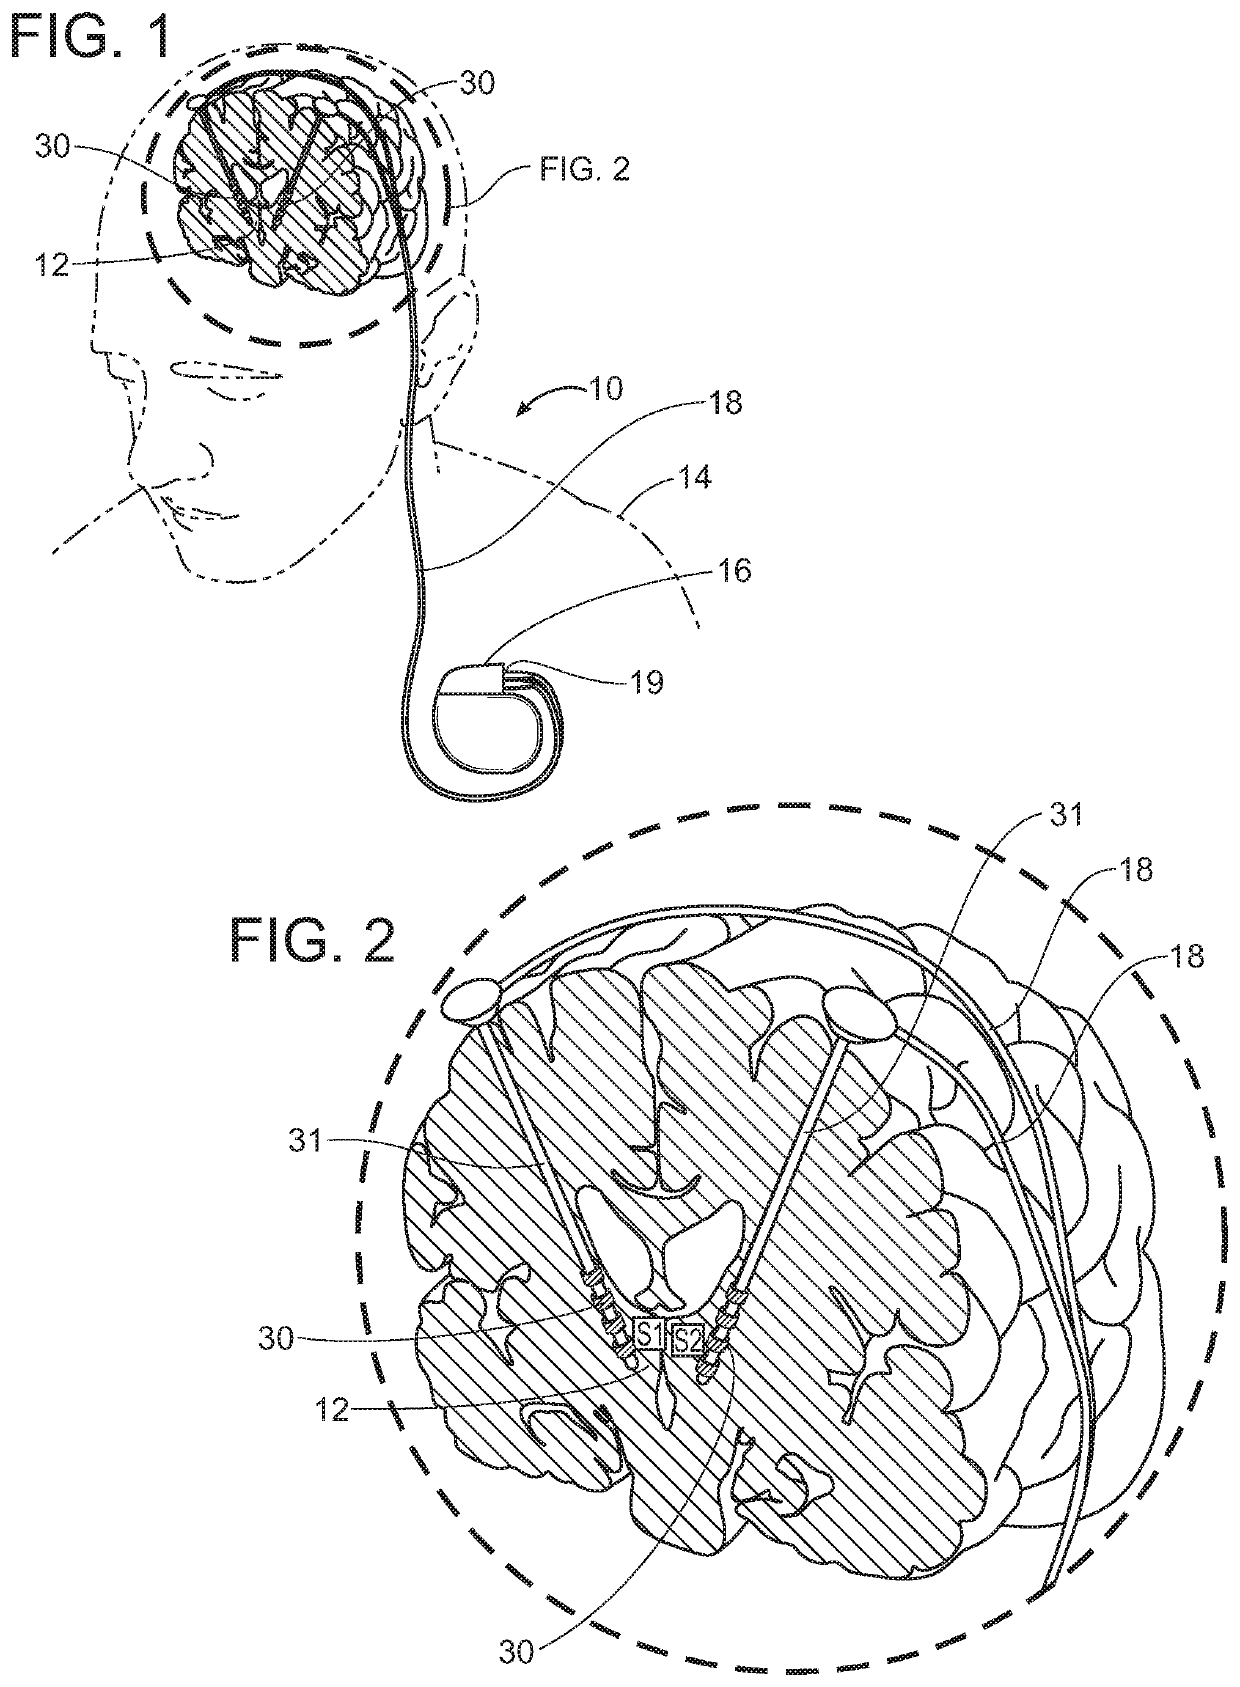 Neuromodulation system and method with feedback optimized electrical field generation